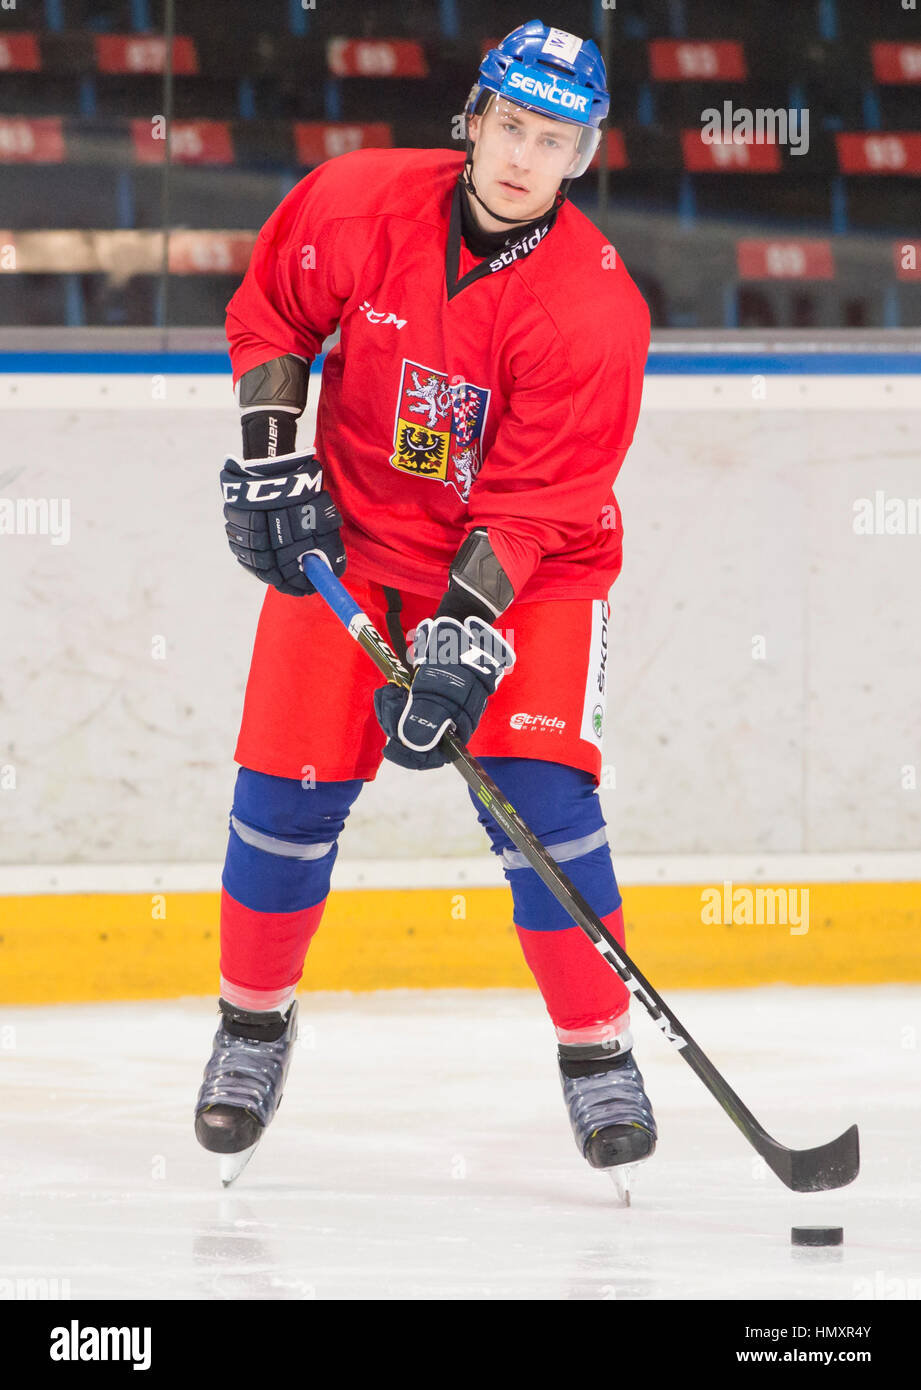 Prague, Czech Republic. 07th Feb, 2017. The Czech national ice-hockey team's player Lukas Klok in action during the training session prior to the February Sweden Games in Gothenburg in Prague, Czech Republic, February 7, 2017. Sweden Games, the third part of the European Hockey Tour (EHT) series, will take place on February 9-12. Credit: Vit Simanek/CTK Photo/Alamy Live News Stock Photo